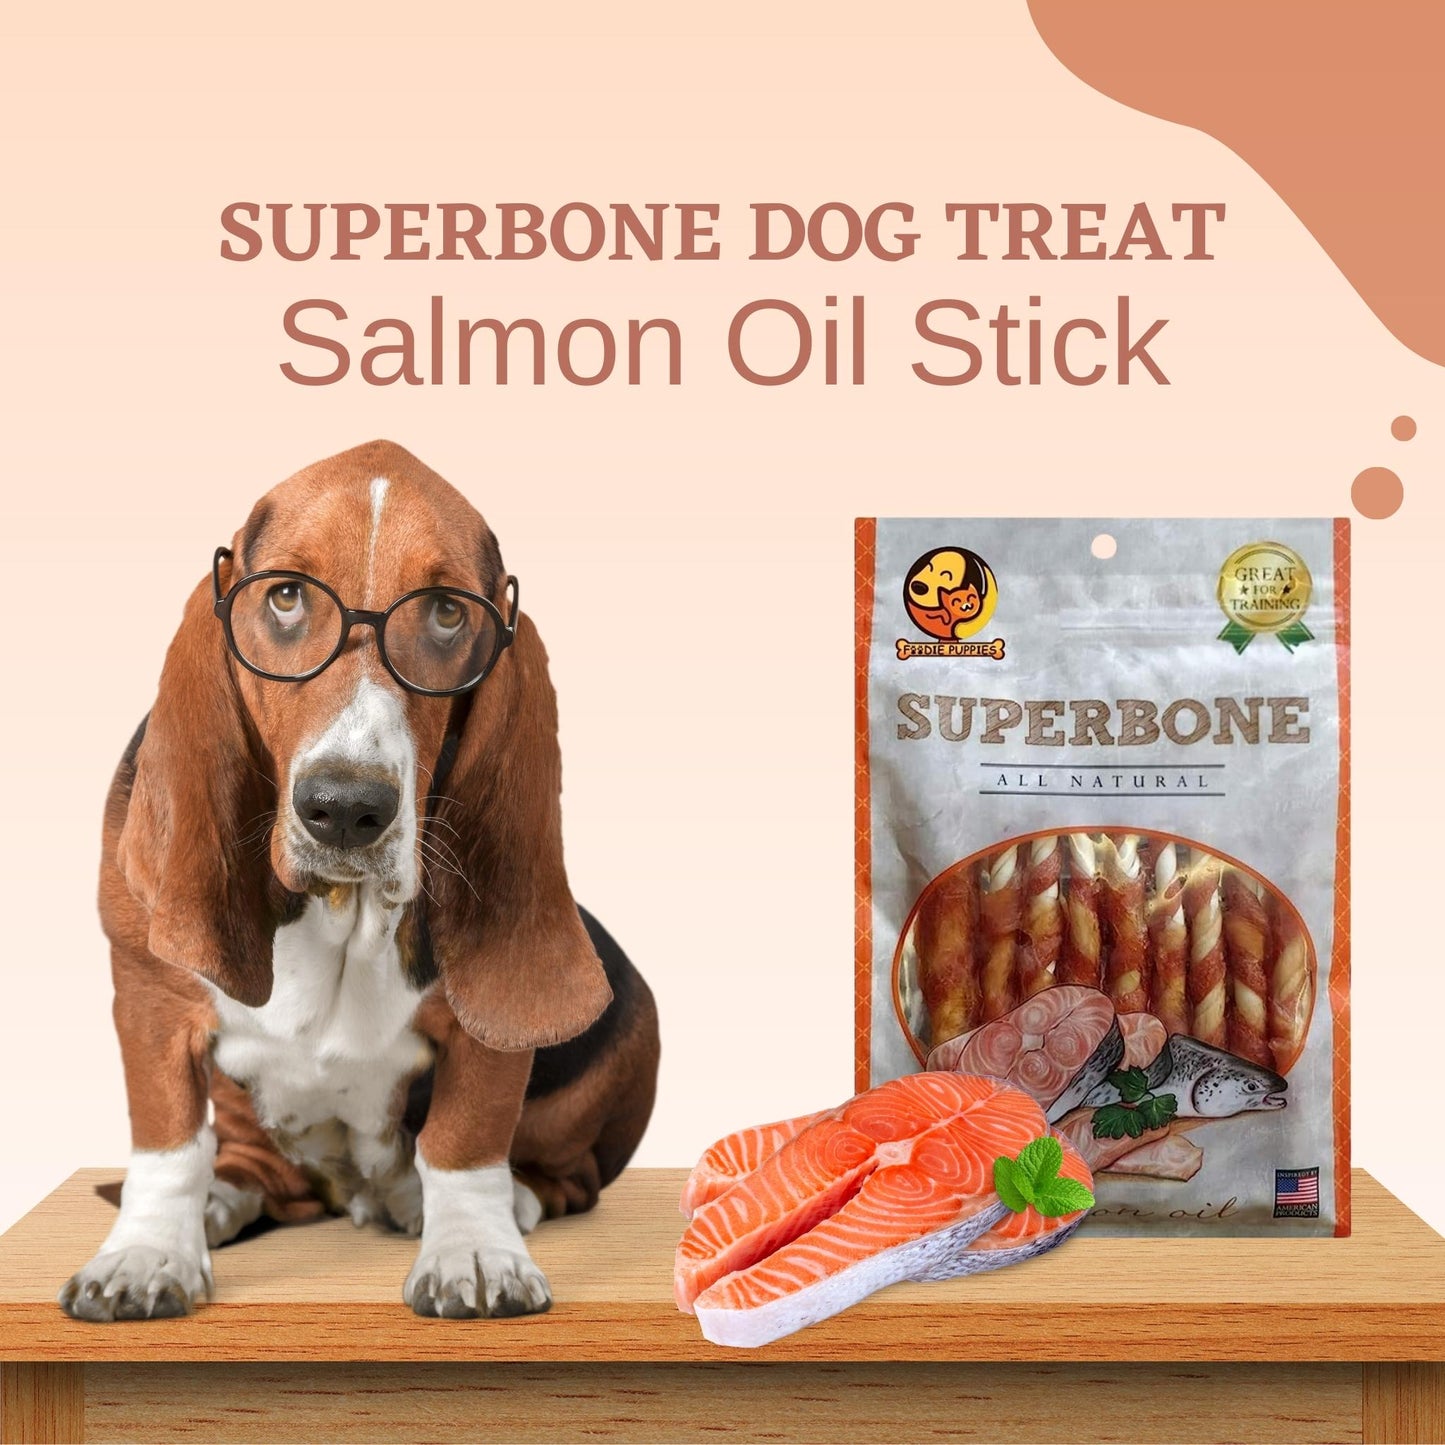 SuperBone All Natural Salmon Oil Stick Dog Treat - Pack of 1